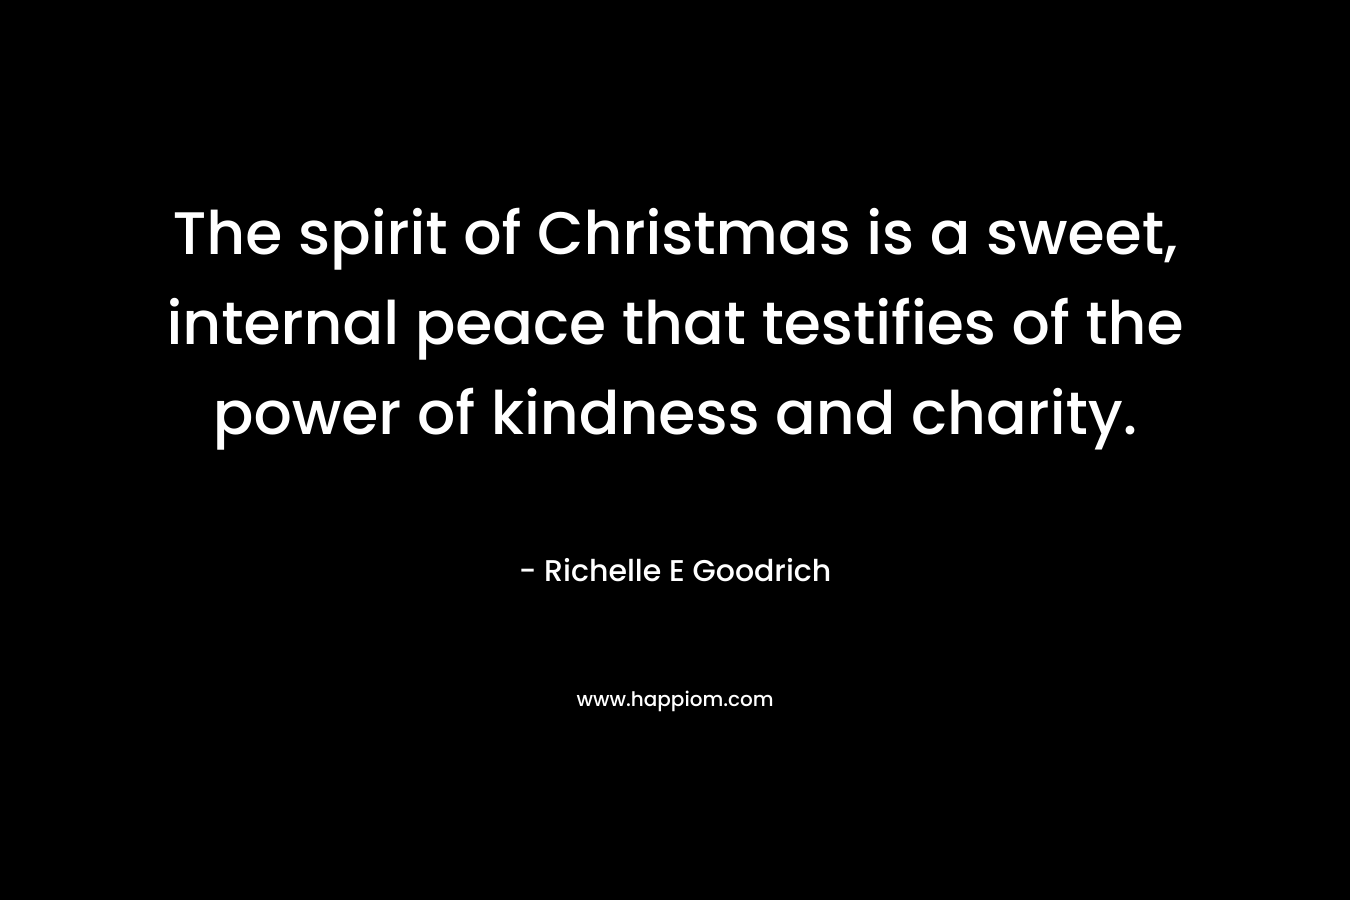 The spirit of Christmas is a sweet, internal peace that testifies of the power of kindness and charity. – Richelle E Goodrich